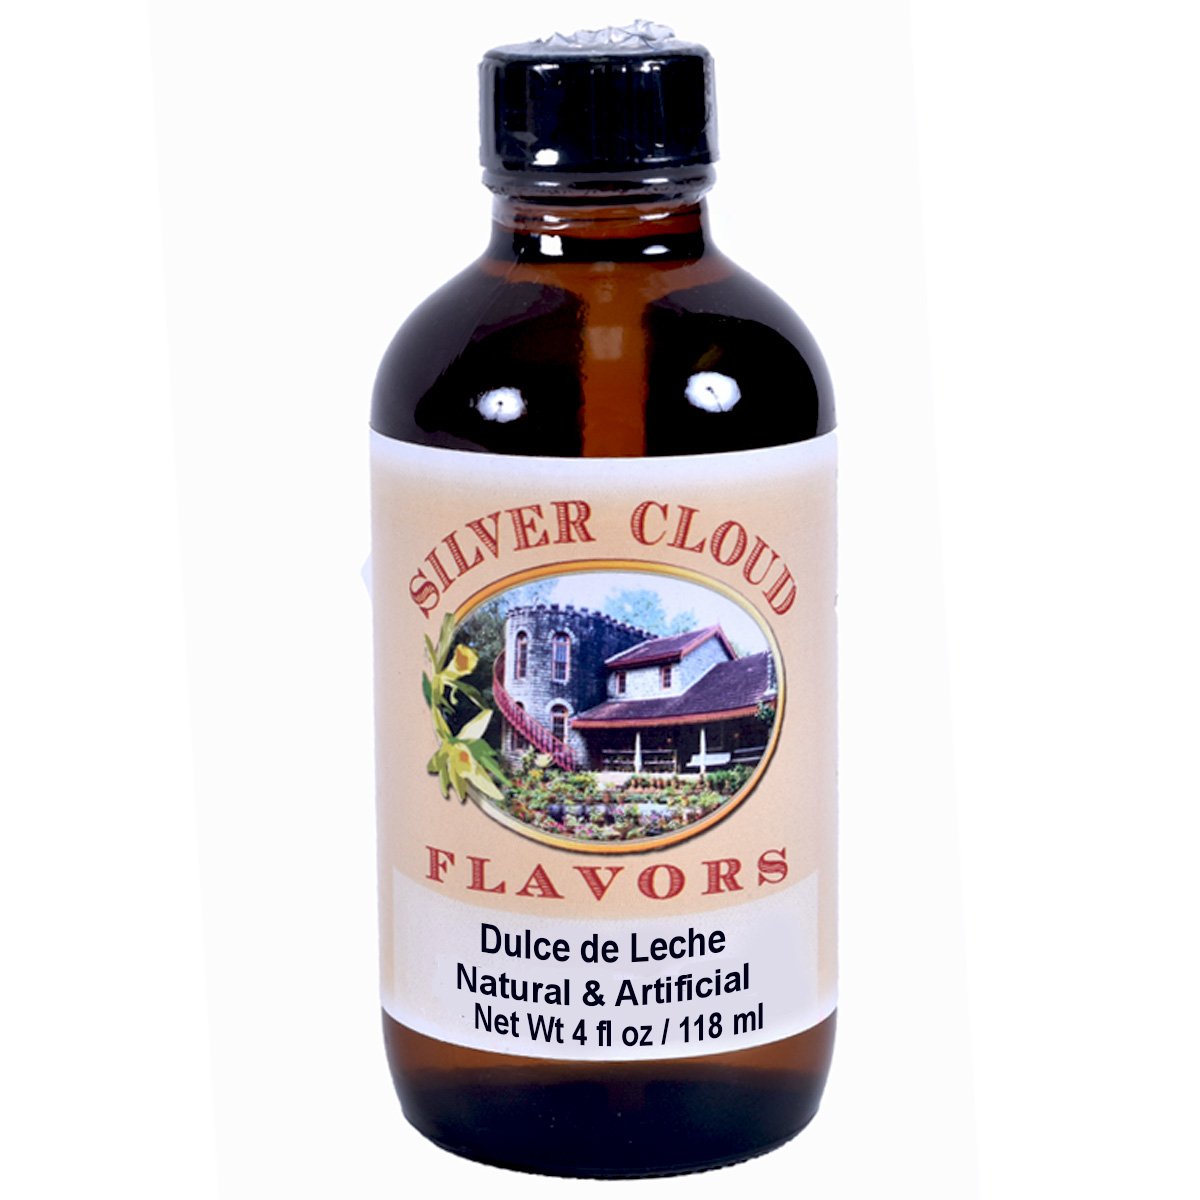 Dulce de Leche Type, Natural & Artificial (Contains <0.10% Artificial Top Note) Silver Cloud Extract - Bake Supply Plus